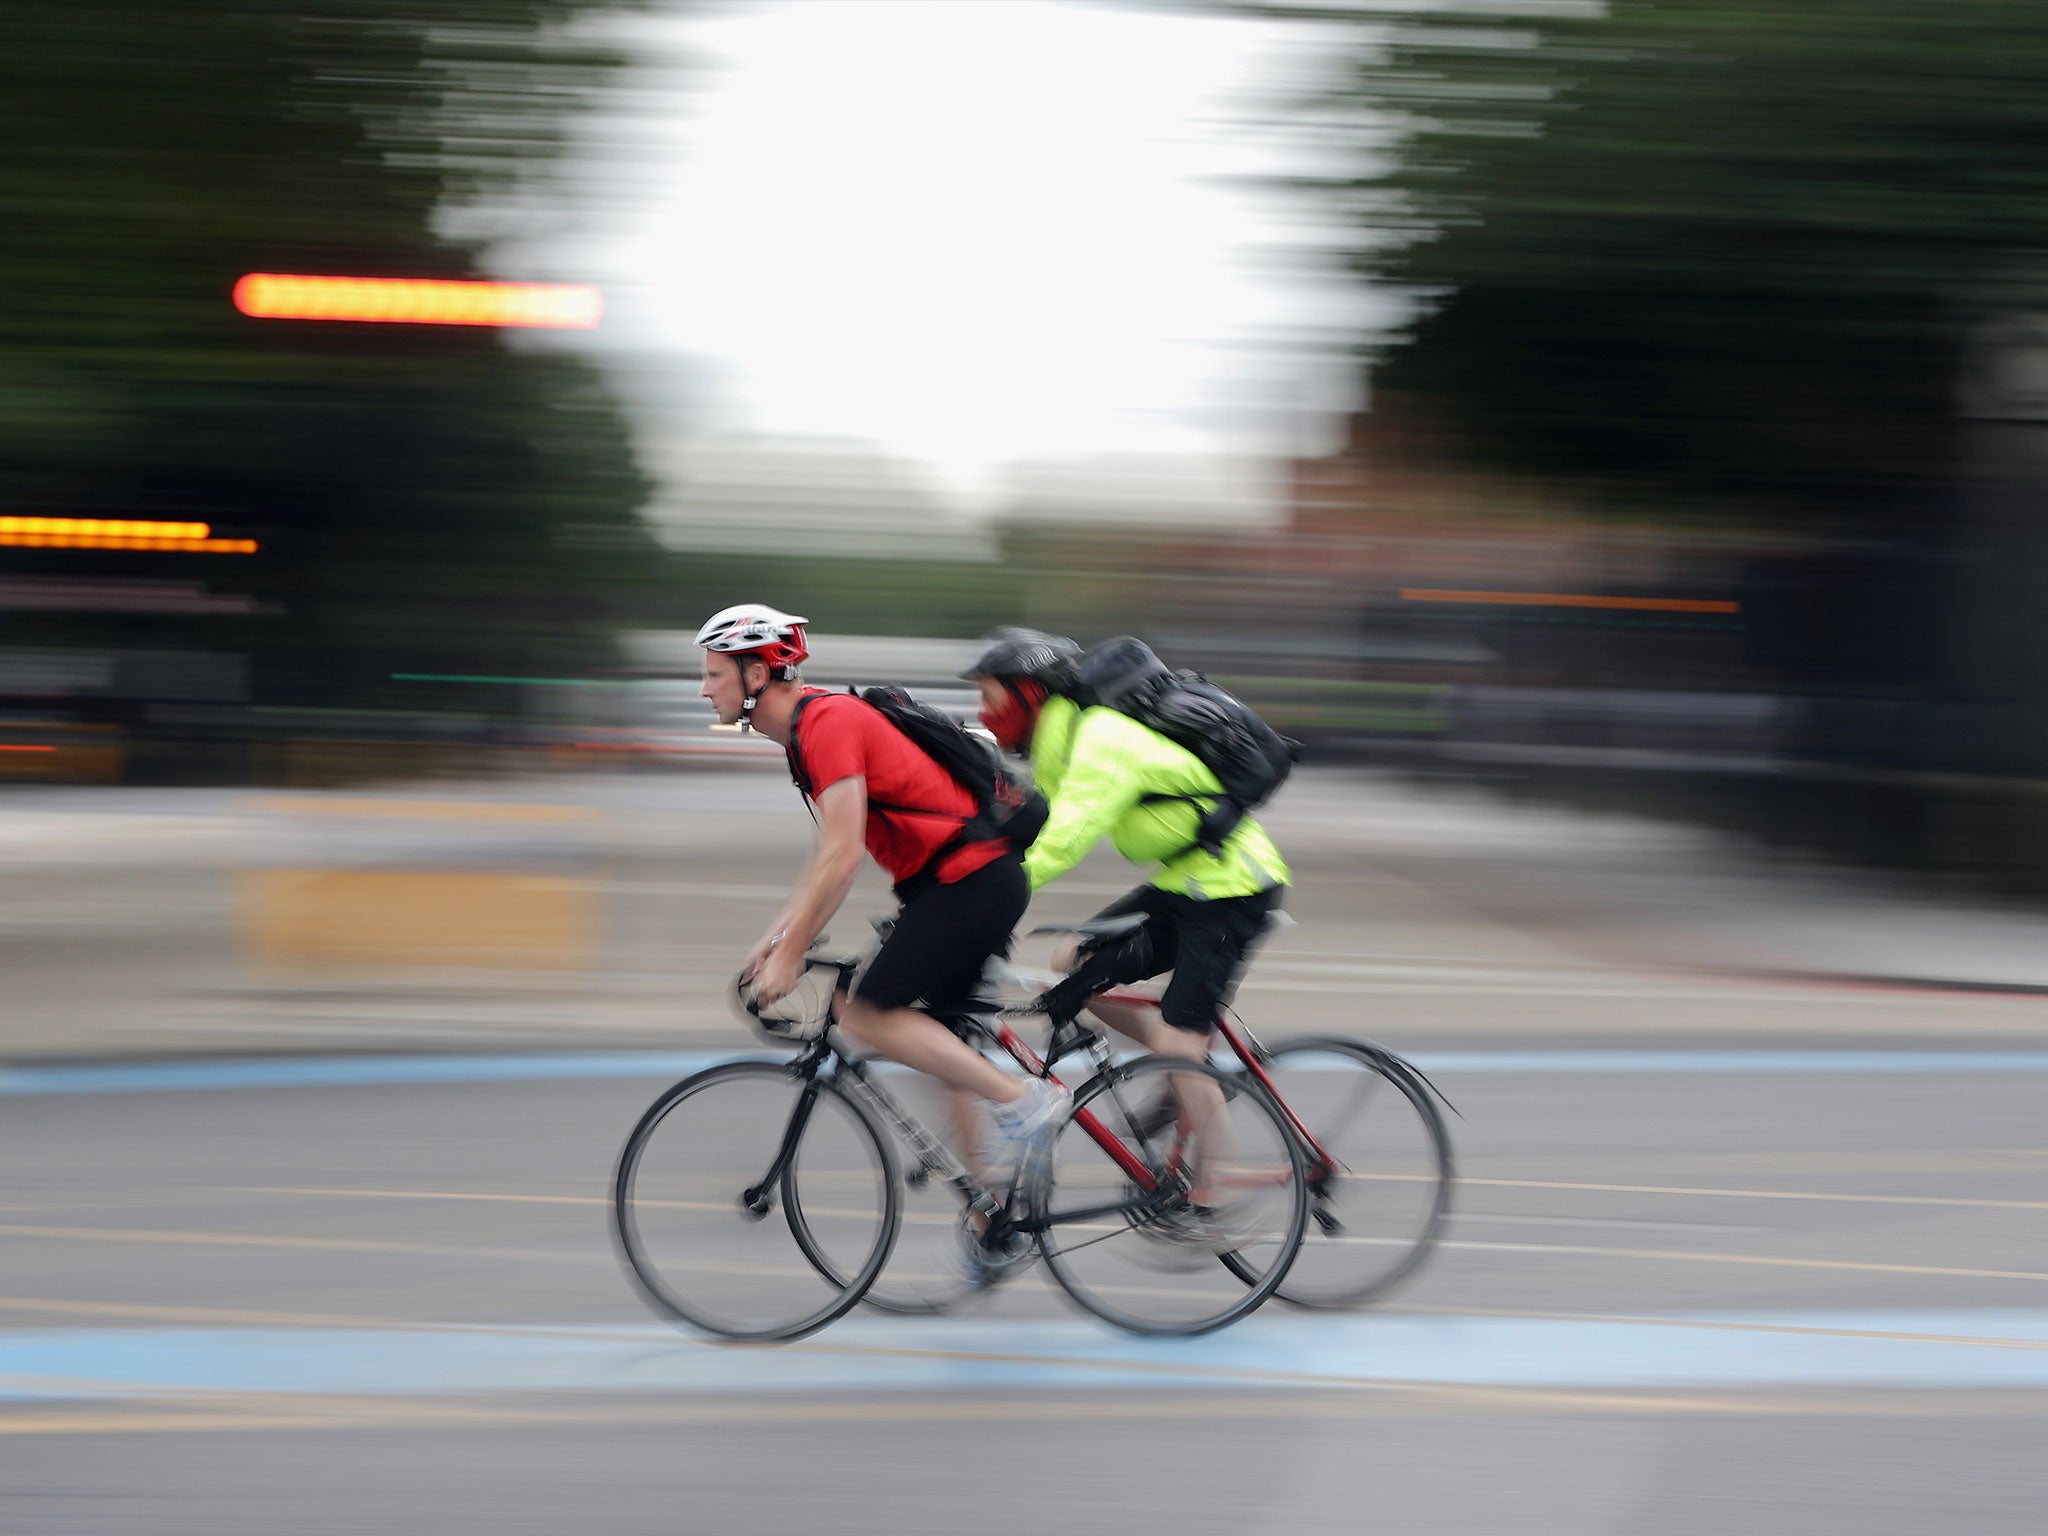 The overwhelming majority of cyclists involved in road traffic accidents continue to be the victim, rather than the cause, of crashes